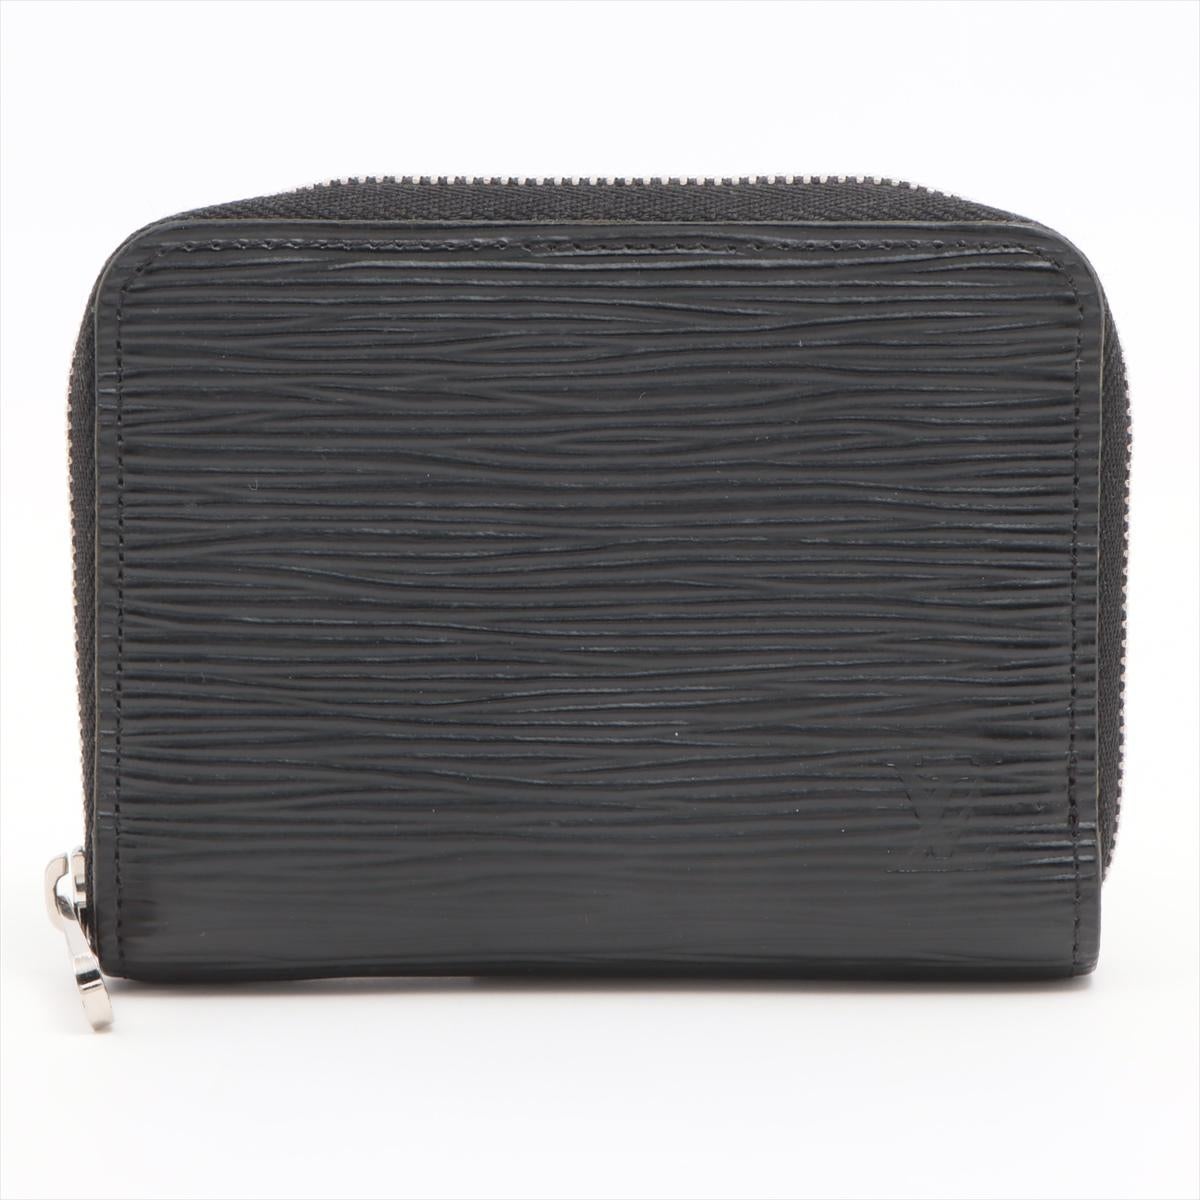 The Louis Vuitton Epi Zippy Coin Purse in Black is a refined and compact accessory that effortlessly blends luxury with functionality. Crafted from the iconic Epi leather, known for its distinctive texture and durability, the coin purse exudes